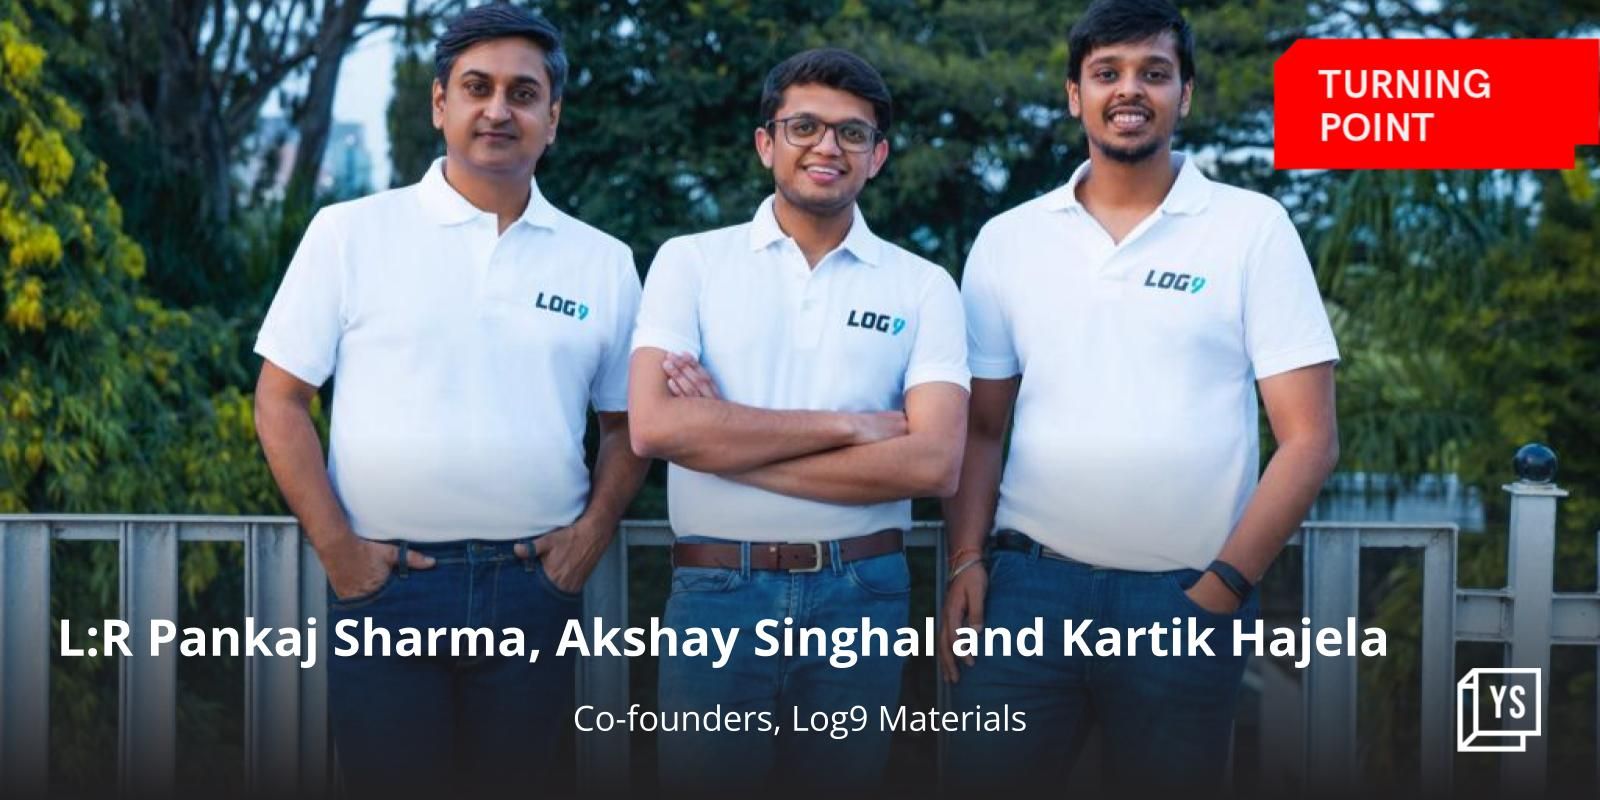 How Log9 Materials is helping India become self-sustainable in the EV sector